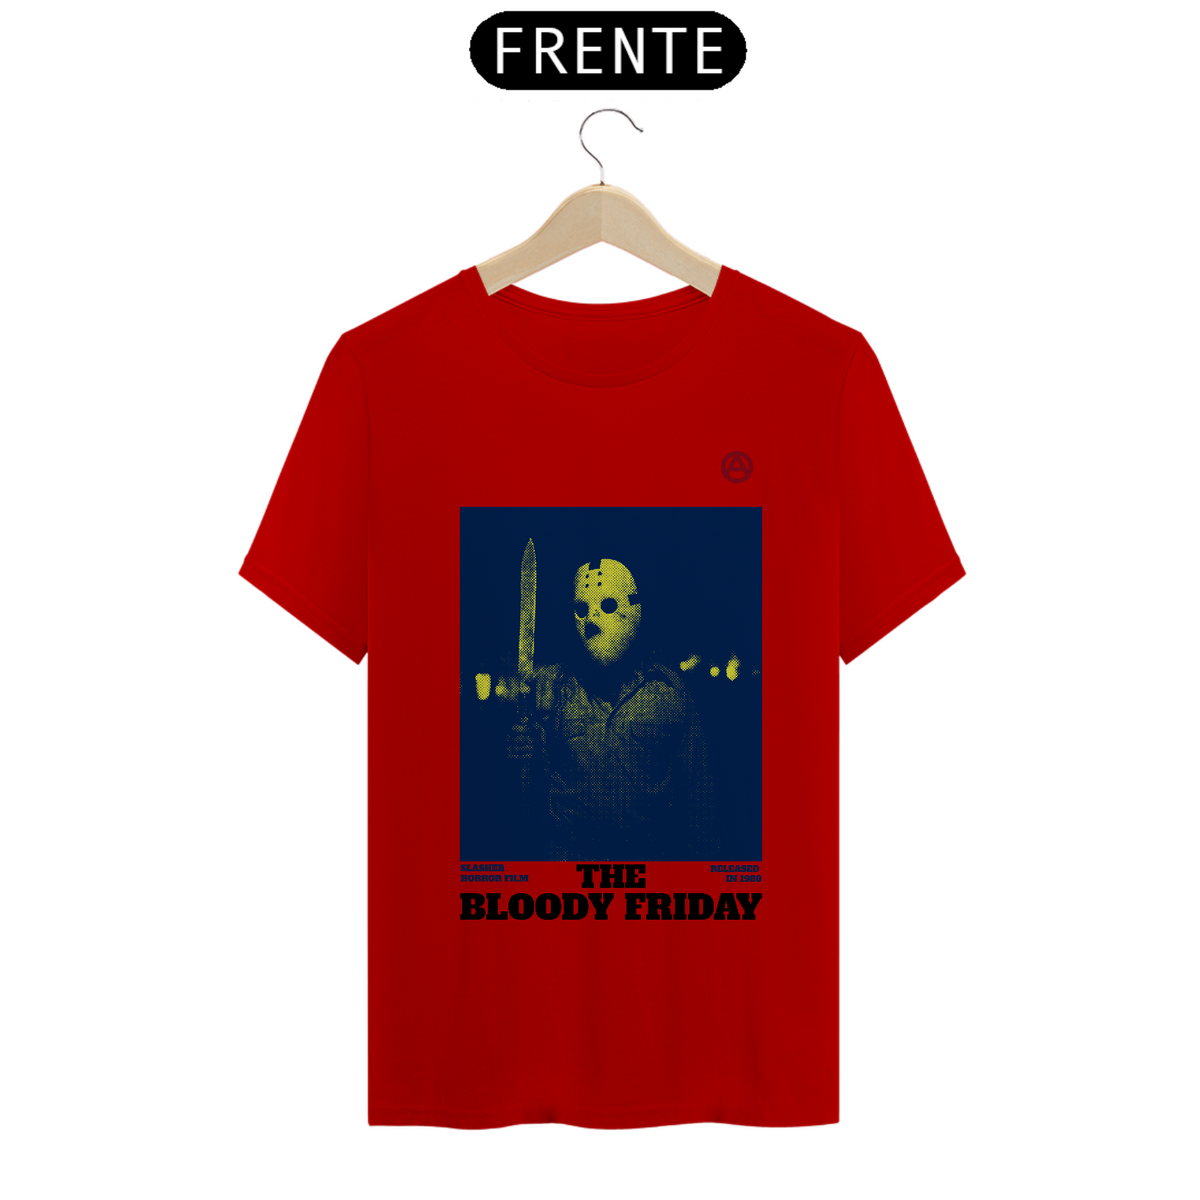 Nome do produto: The Bloody Friday - T-Shirt Quality